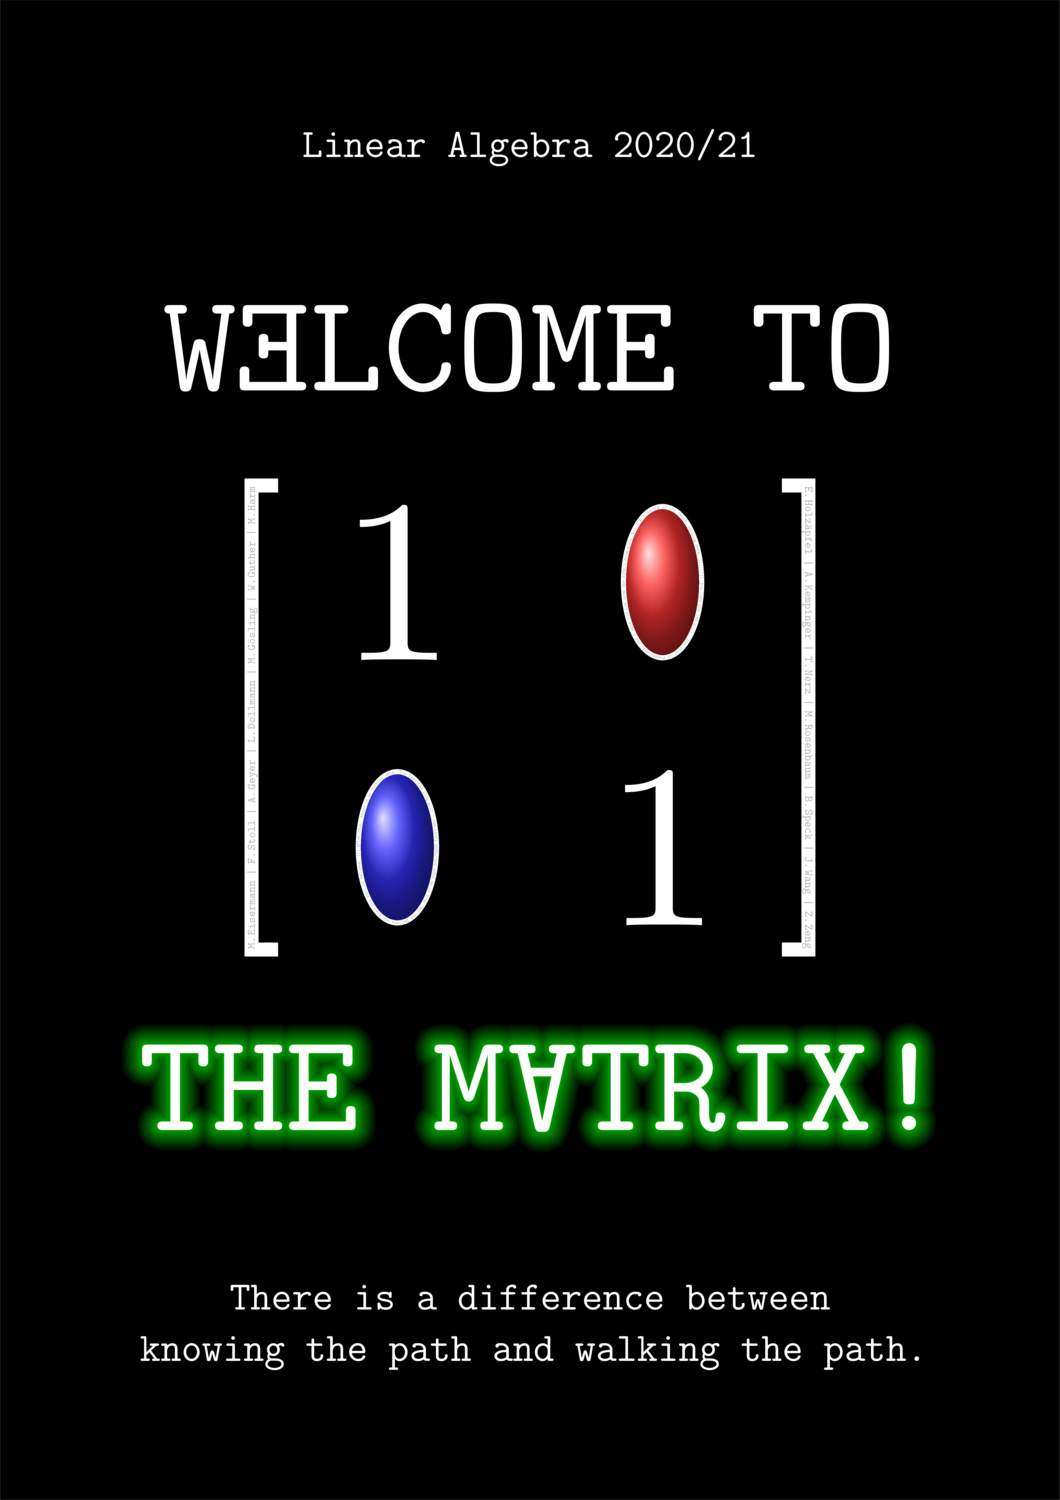 Welcome to the Matrix!